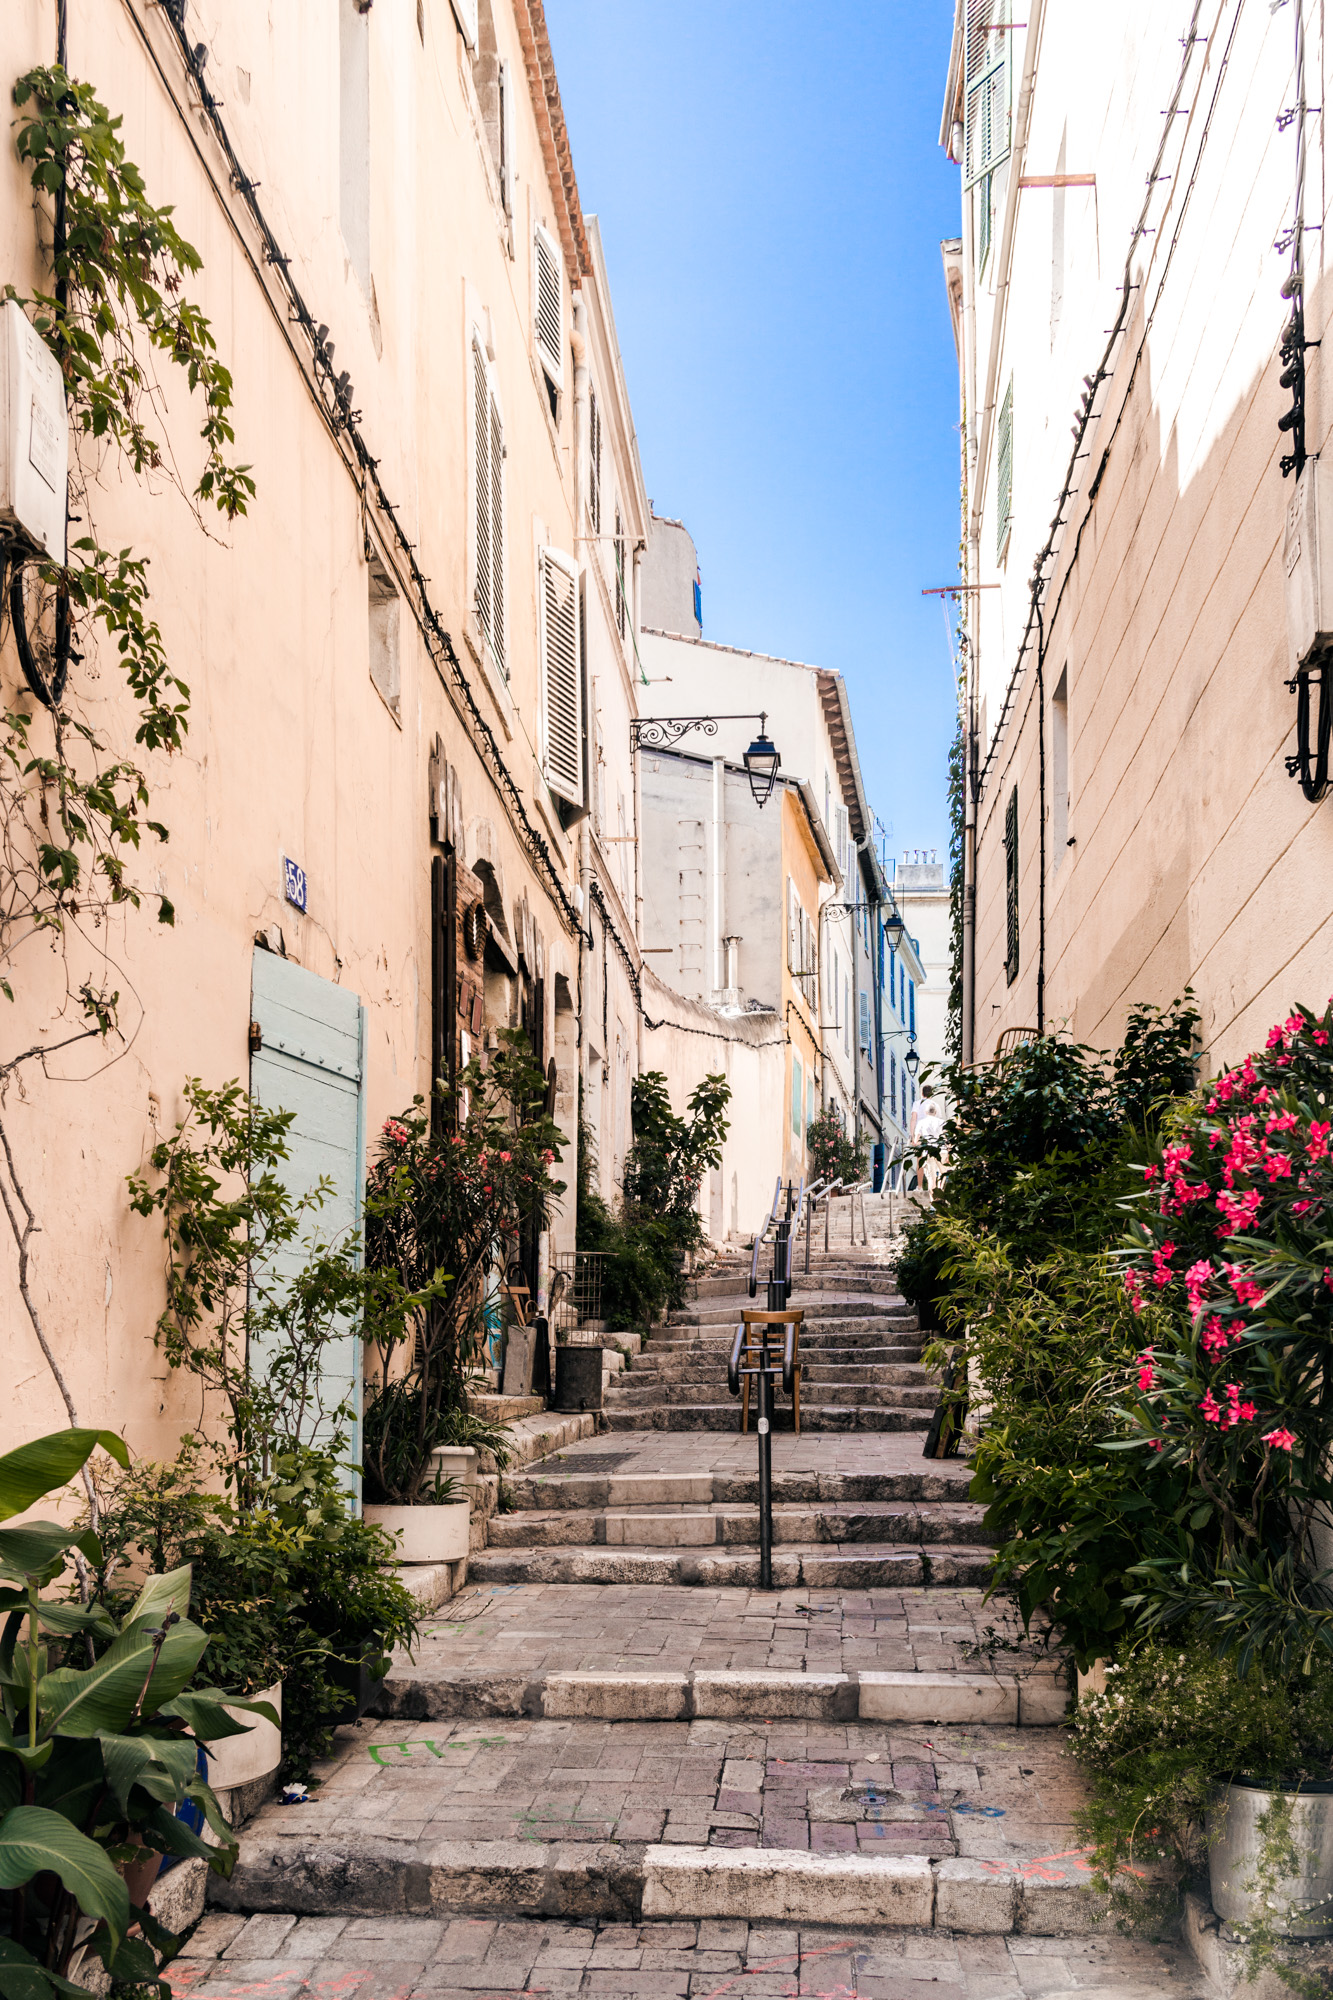 A week in Arles – day trip to Marseille